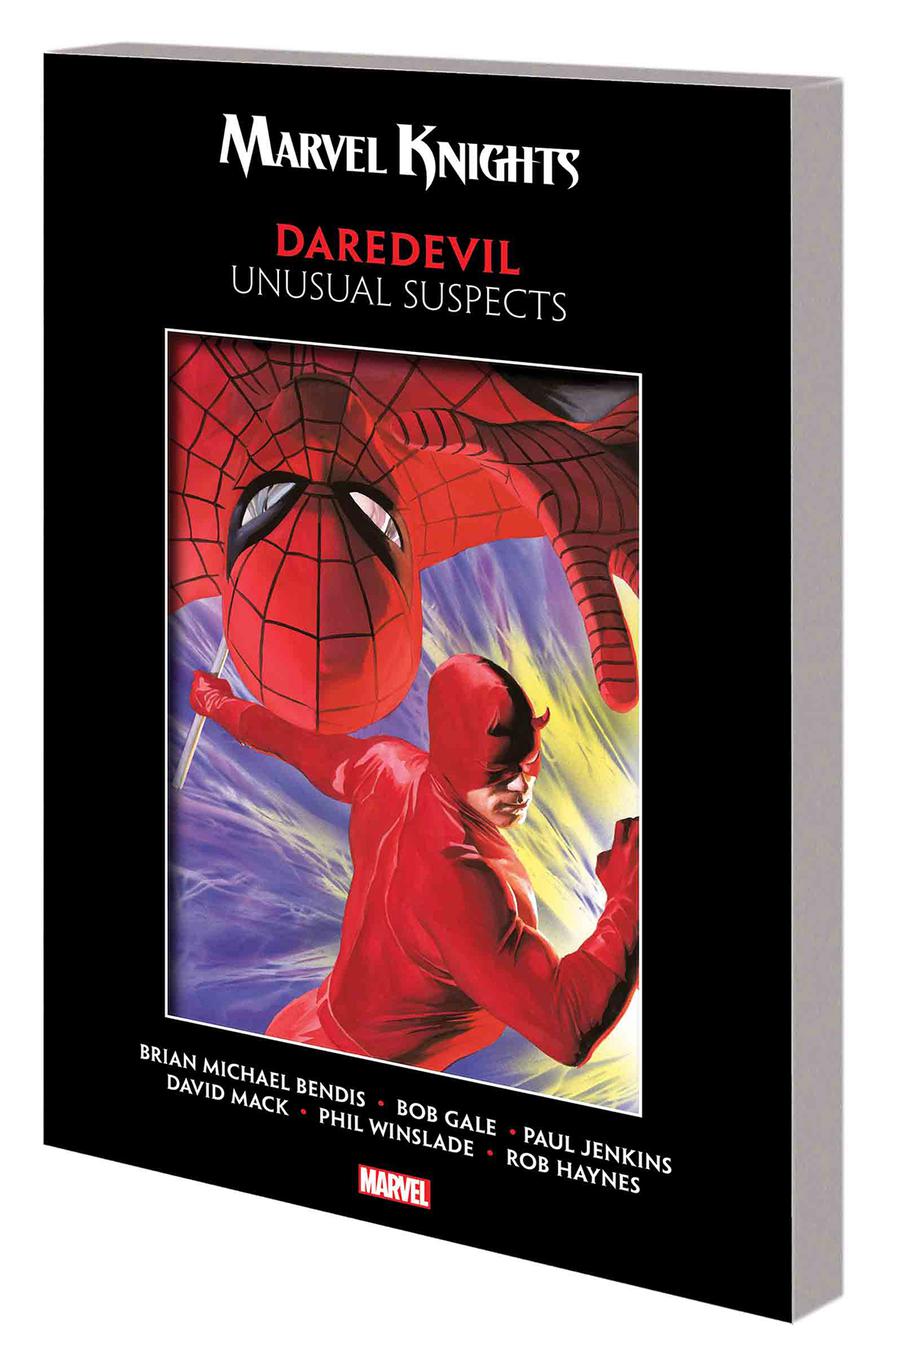 Marvel Knights Daredevil By Bendis Jenkins Gale & Mack Unusual Suspects TP